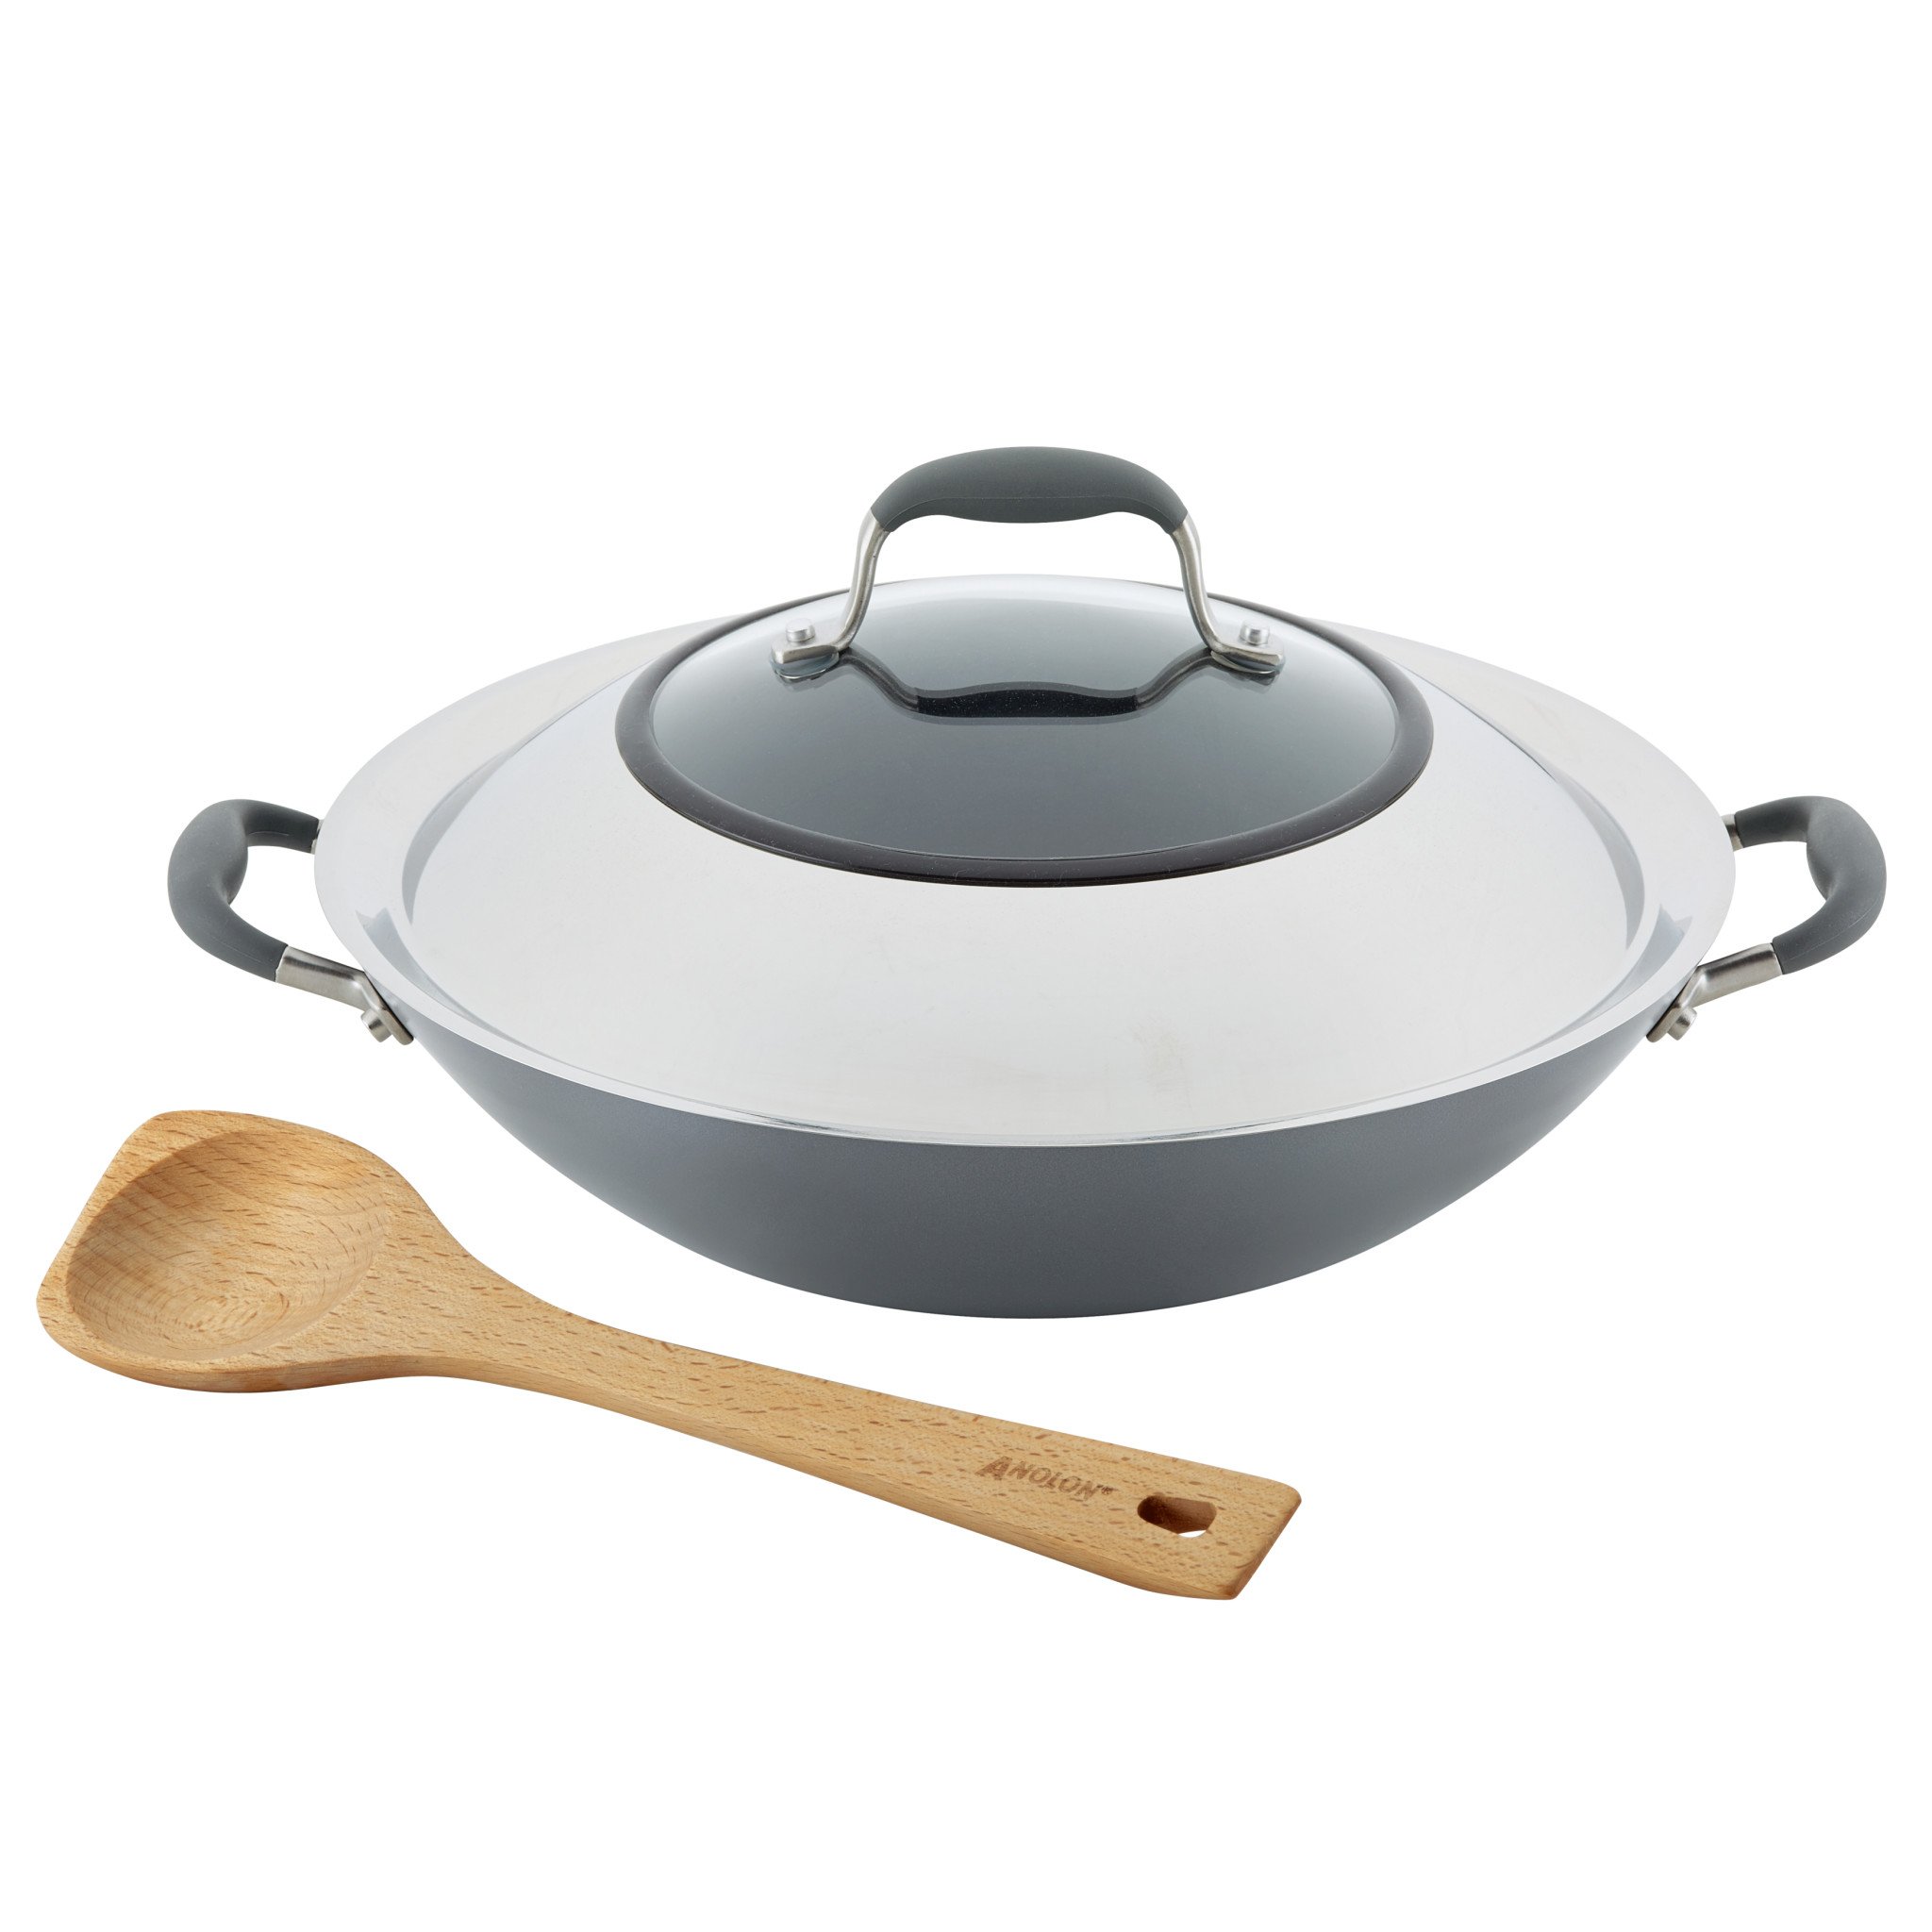 https://res.cloudinary.com/hz3gmuqw6/image/upload/v1621426866/shop/product/anolon-advanced-home-14-covered-wok-wtih-wood-spoon-moonstone_60a502b22d0c9.jpg